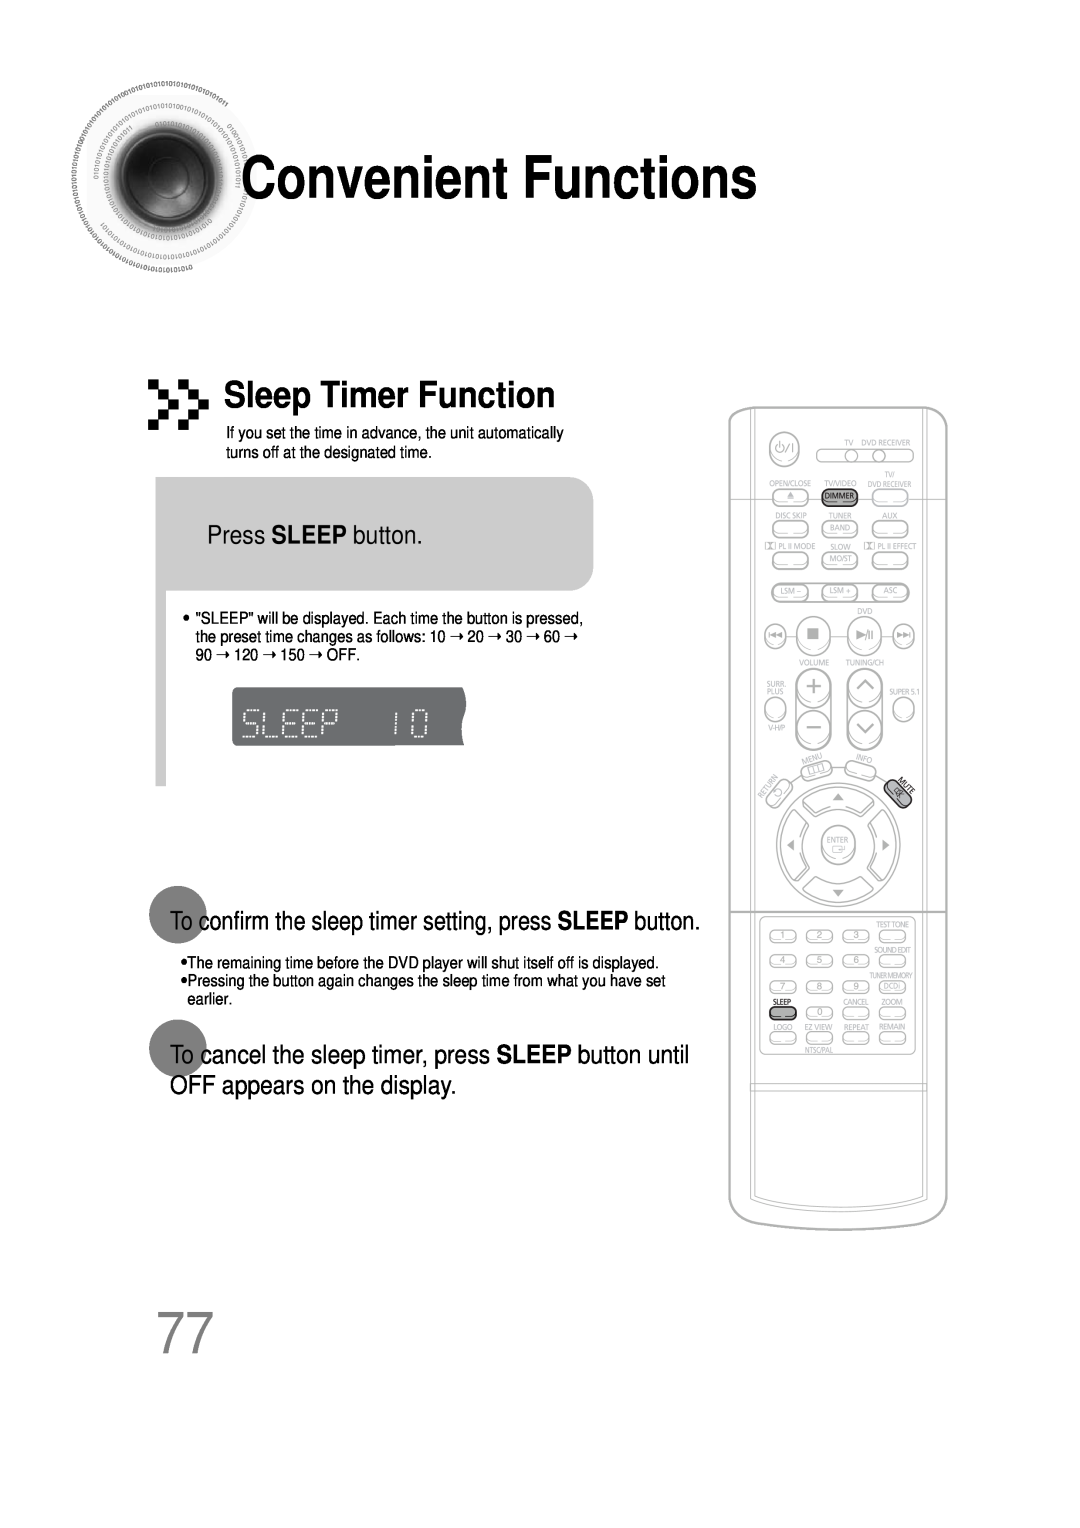 Samsung HT-DS665T, AH68-01493X ConvenientFunctions, Sleep Timer Function, Press SLEEP button, OFF appears on the display 